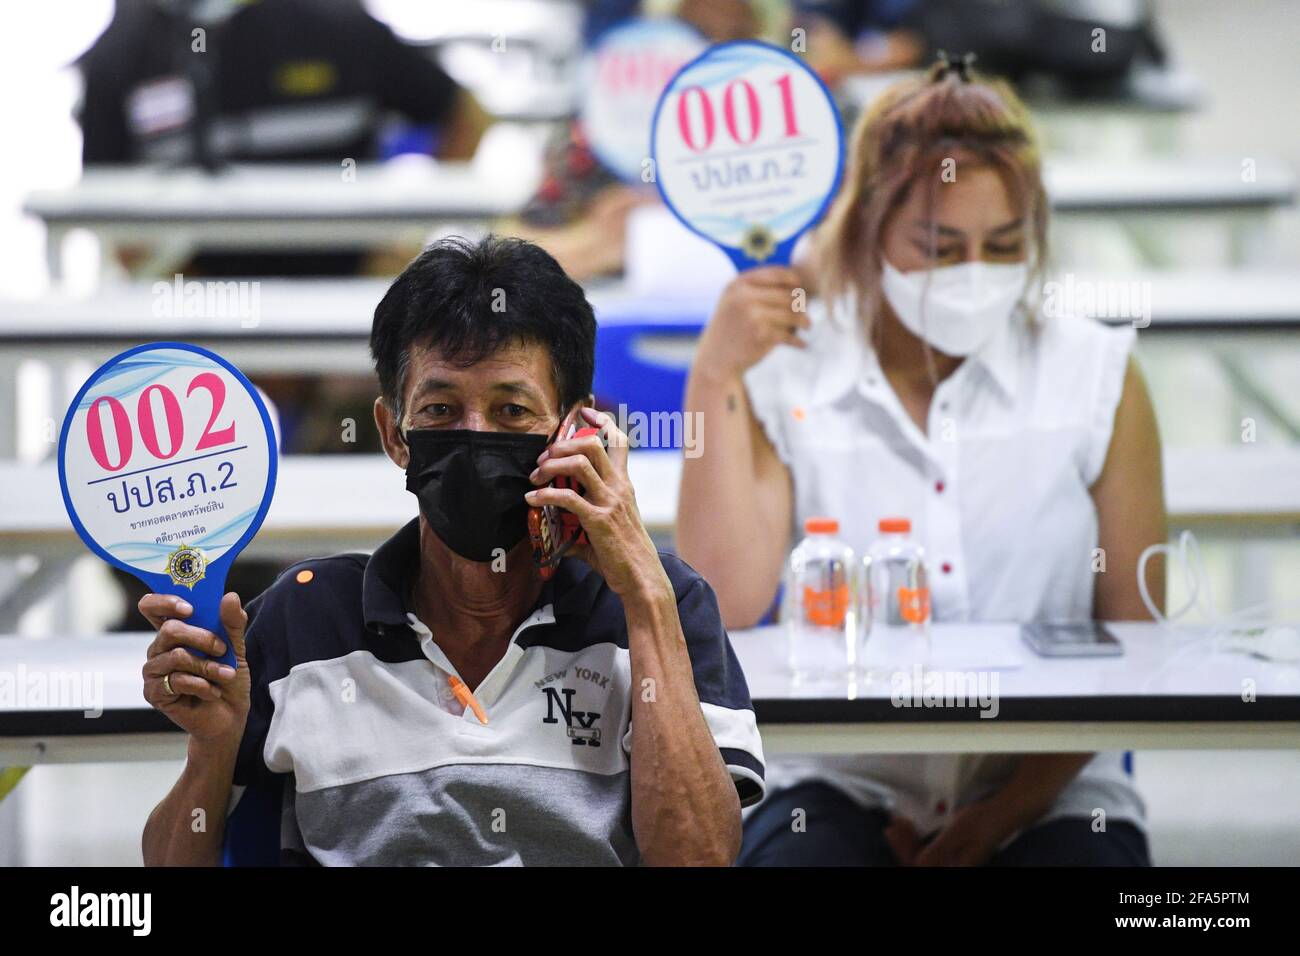 People raise their bidding signs at an auction for pedigree cats which were  confiscated as live assets in a drug bust case in Rayong province, Thailand, April 23, 2021. REUTERS/Chalinee Thirasupa Stock Photo